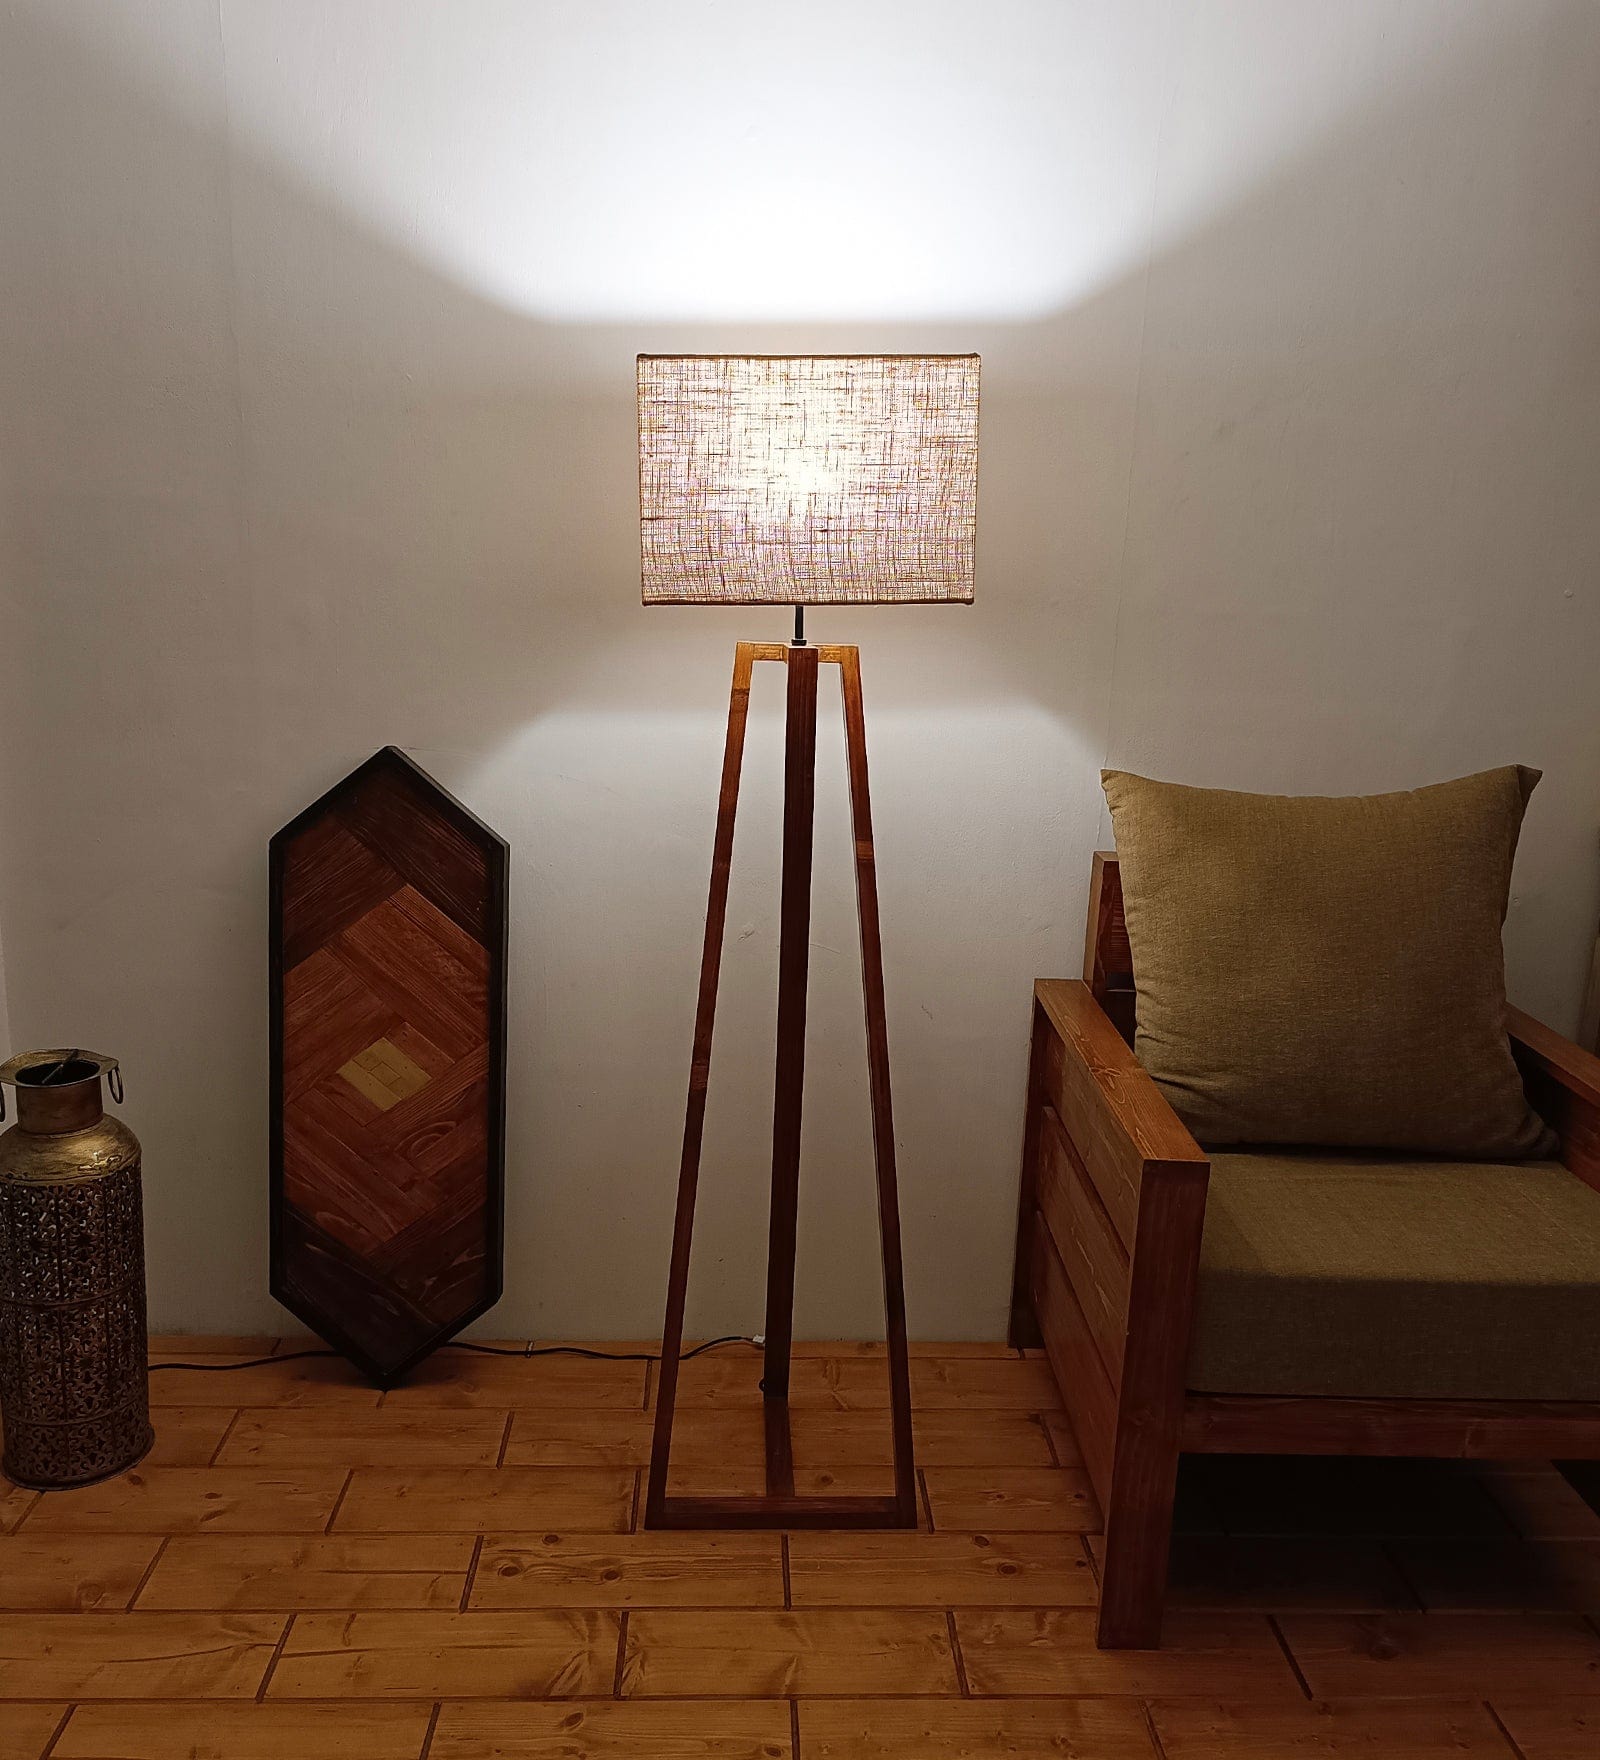 Catapult Wooden Floor Lamp with Brown Base Premium Beige Fabric Lampshade (BULB NOT INCLUDED)